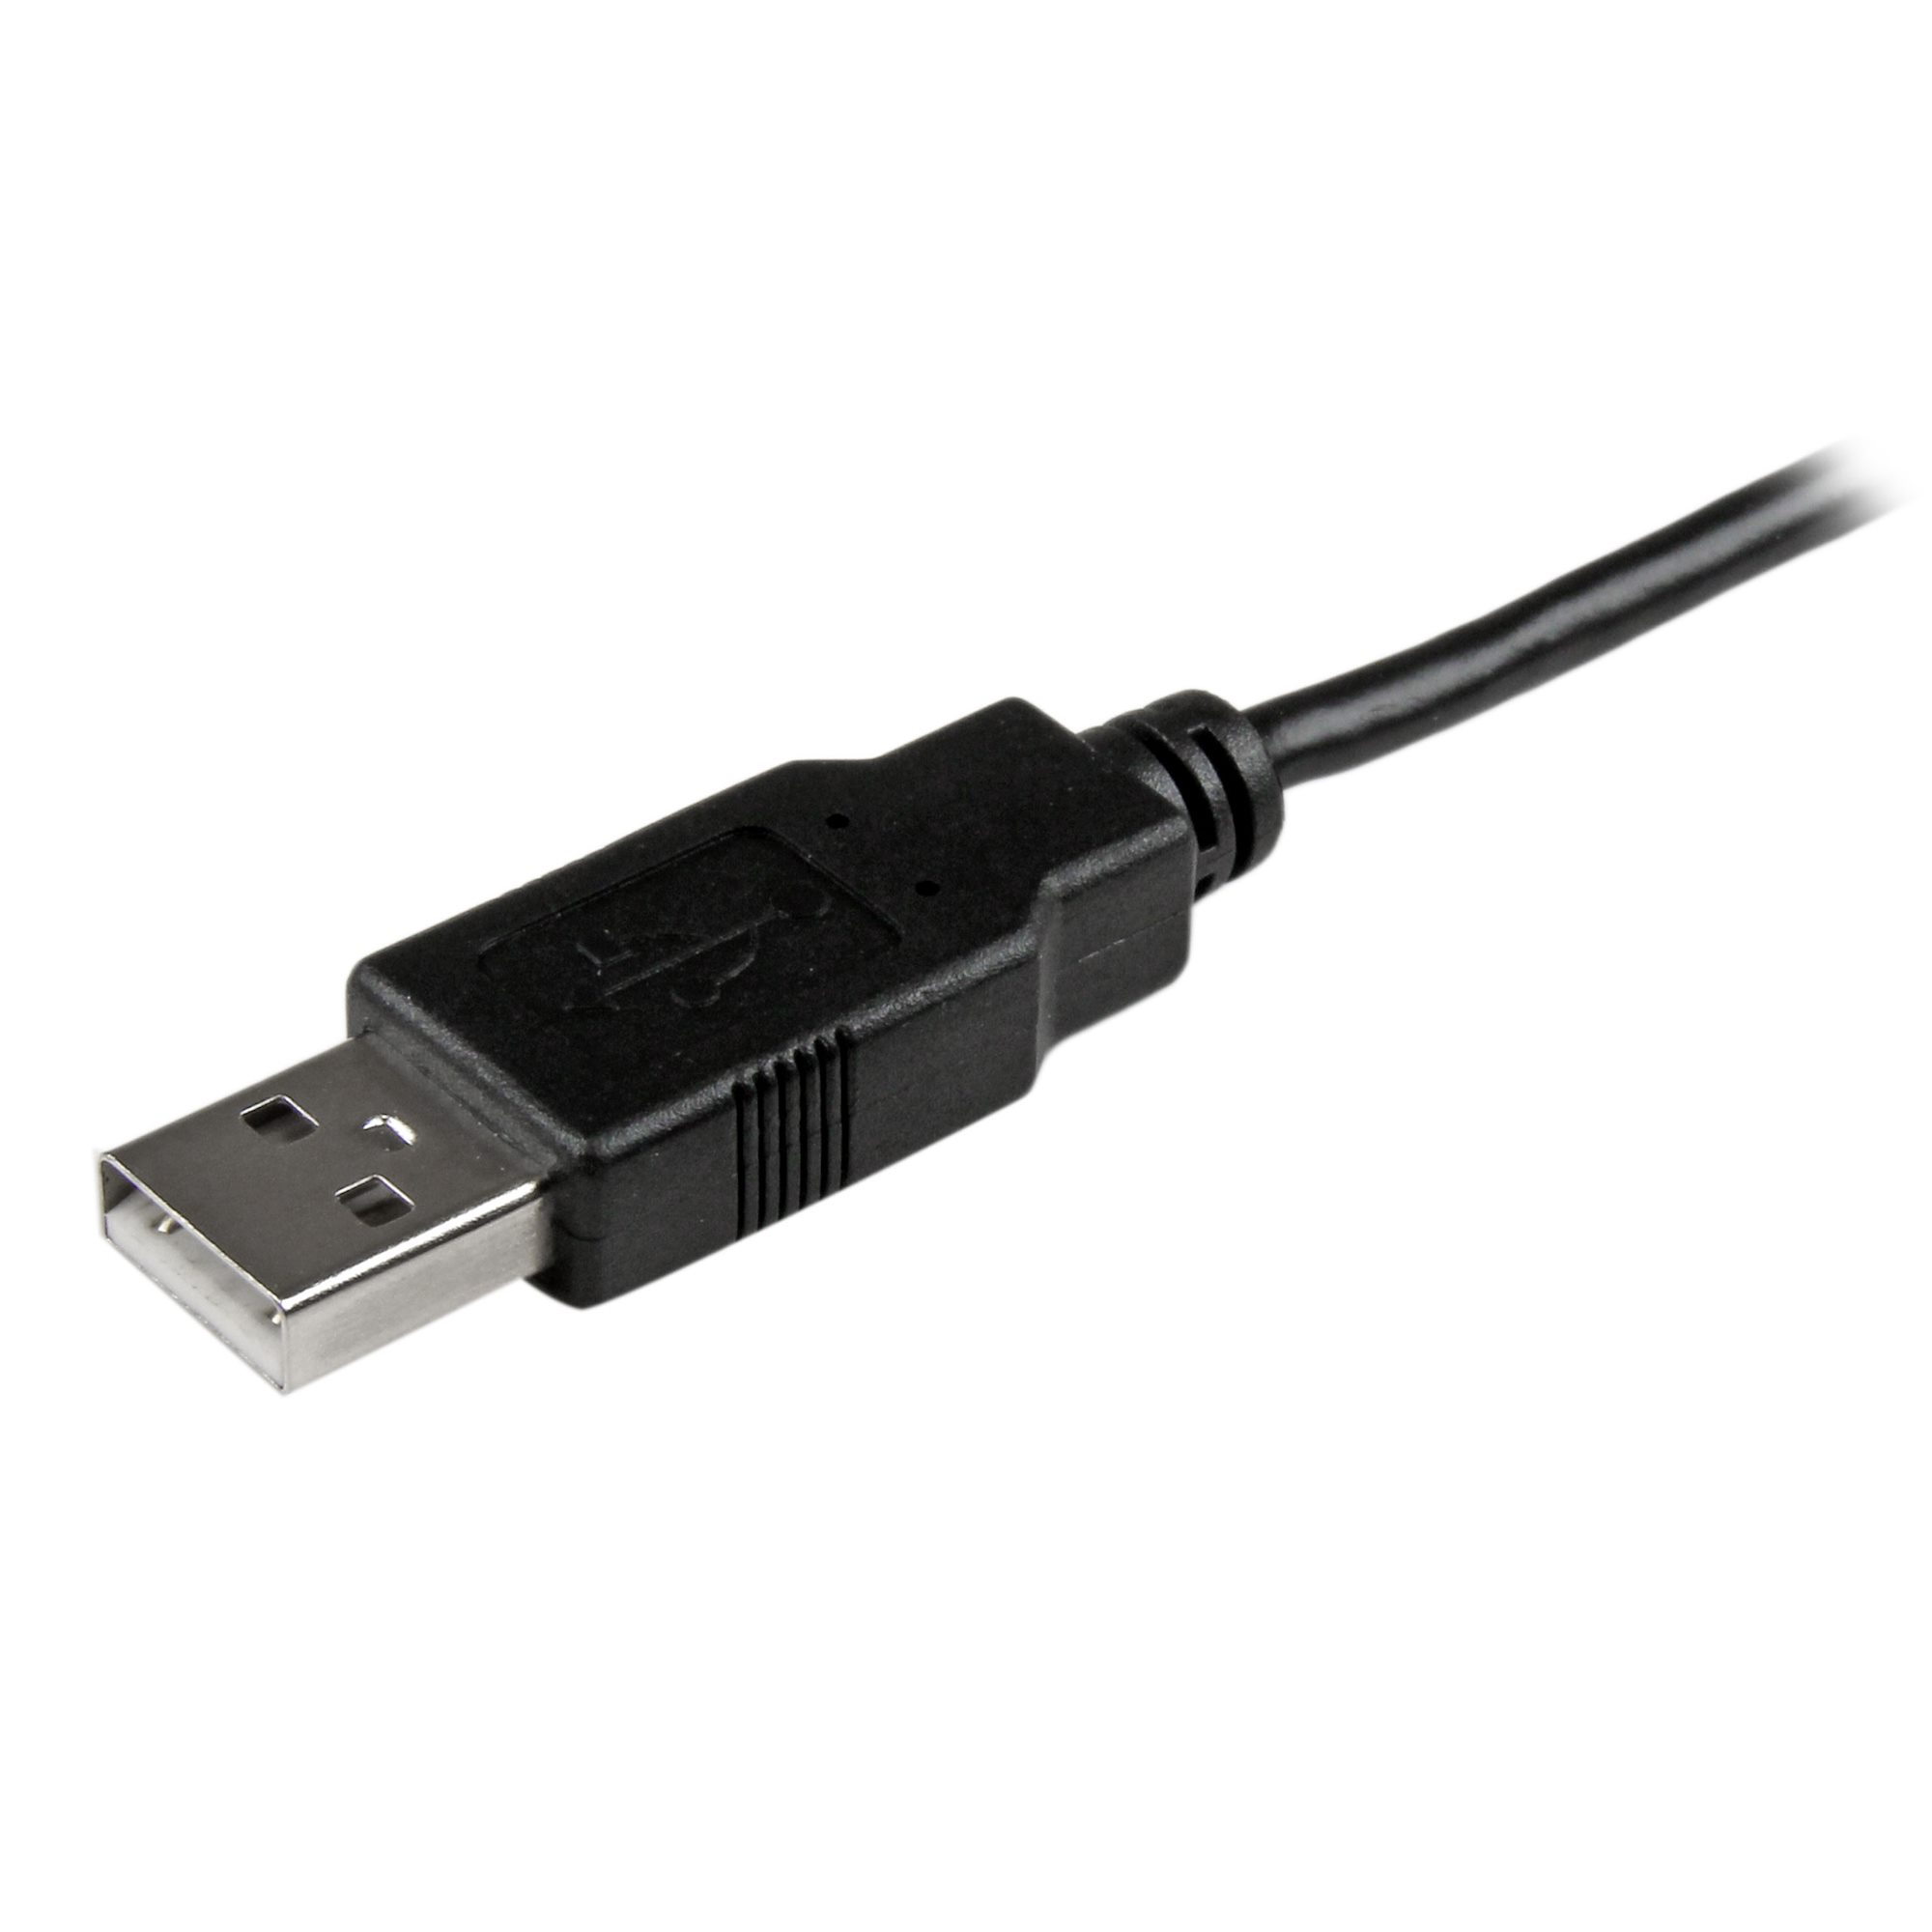 15cm Slim Micro USB Phone Charger Cable - Micro USB Cables